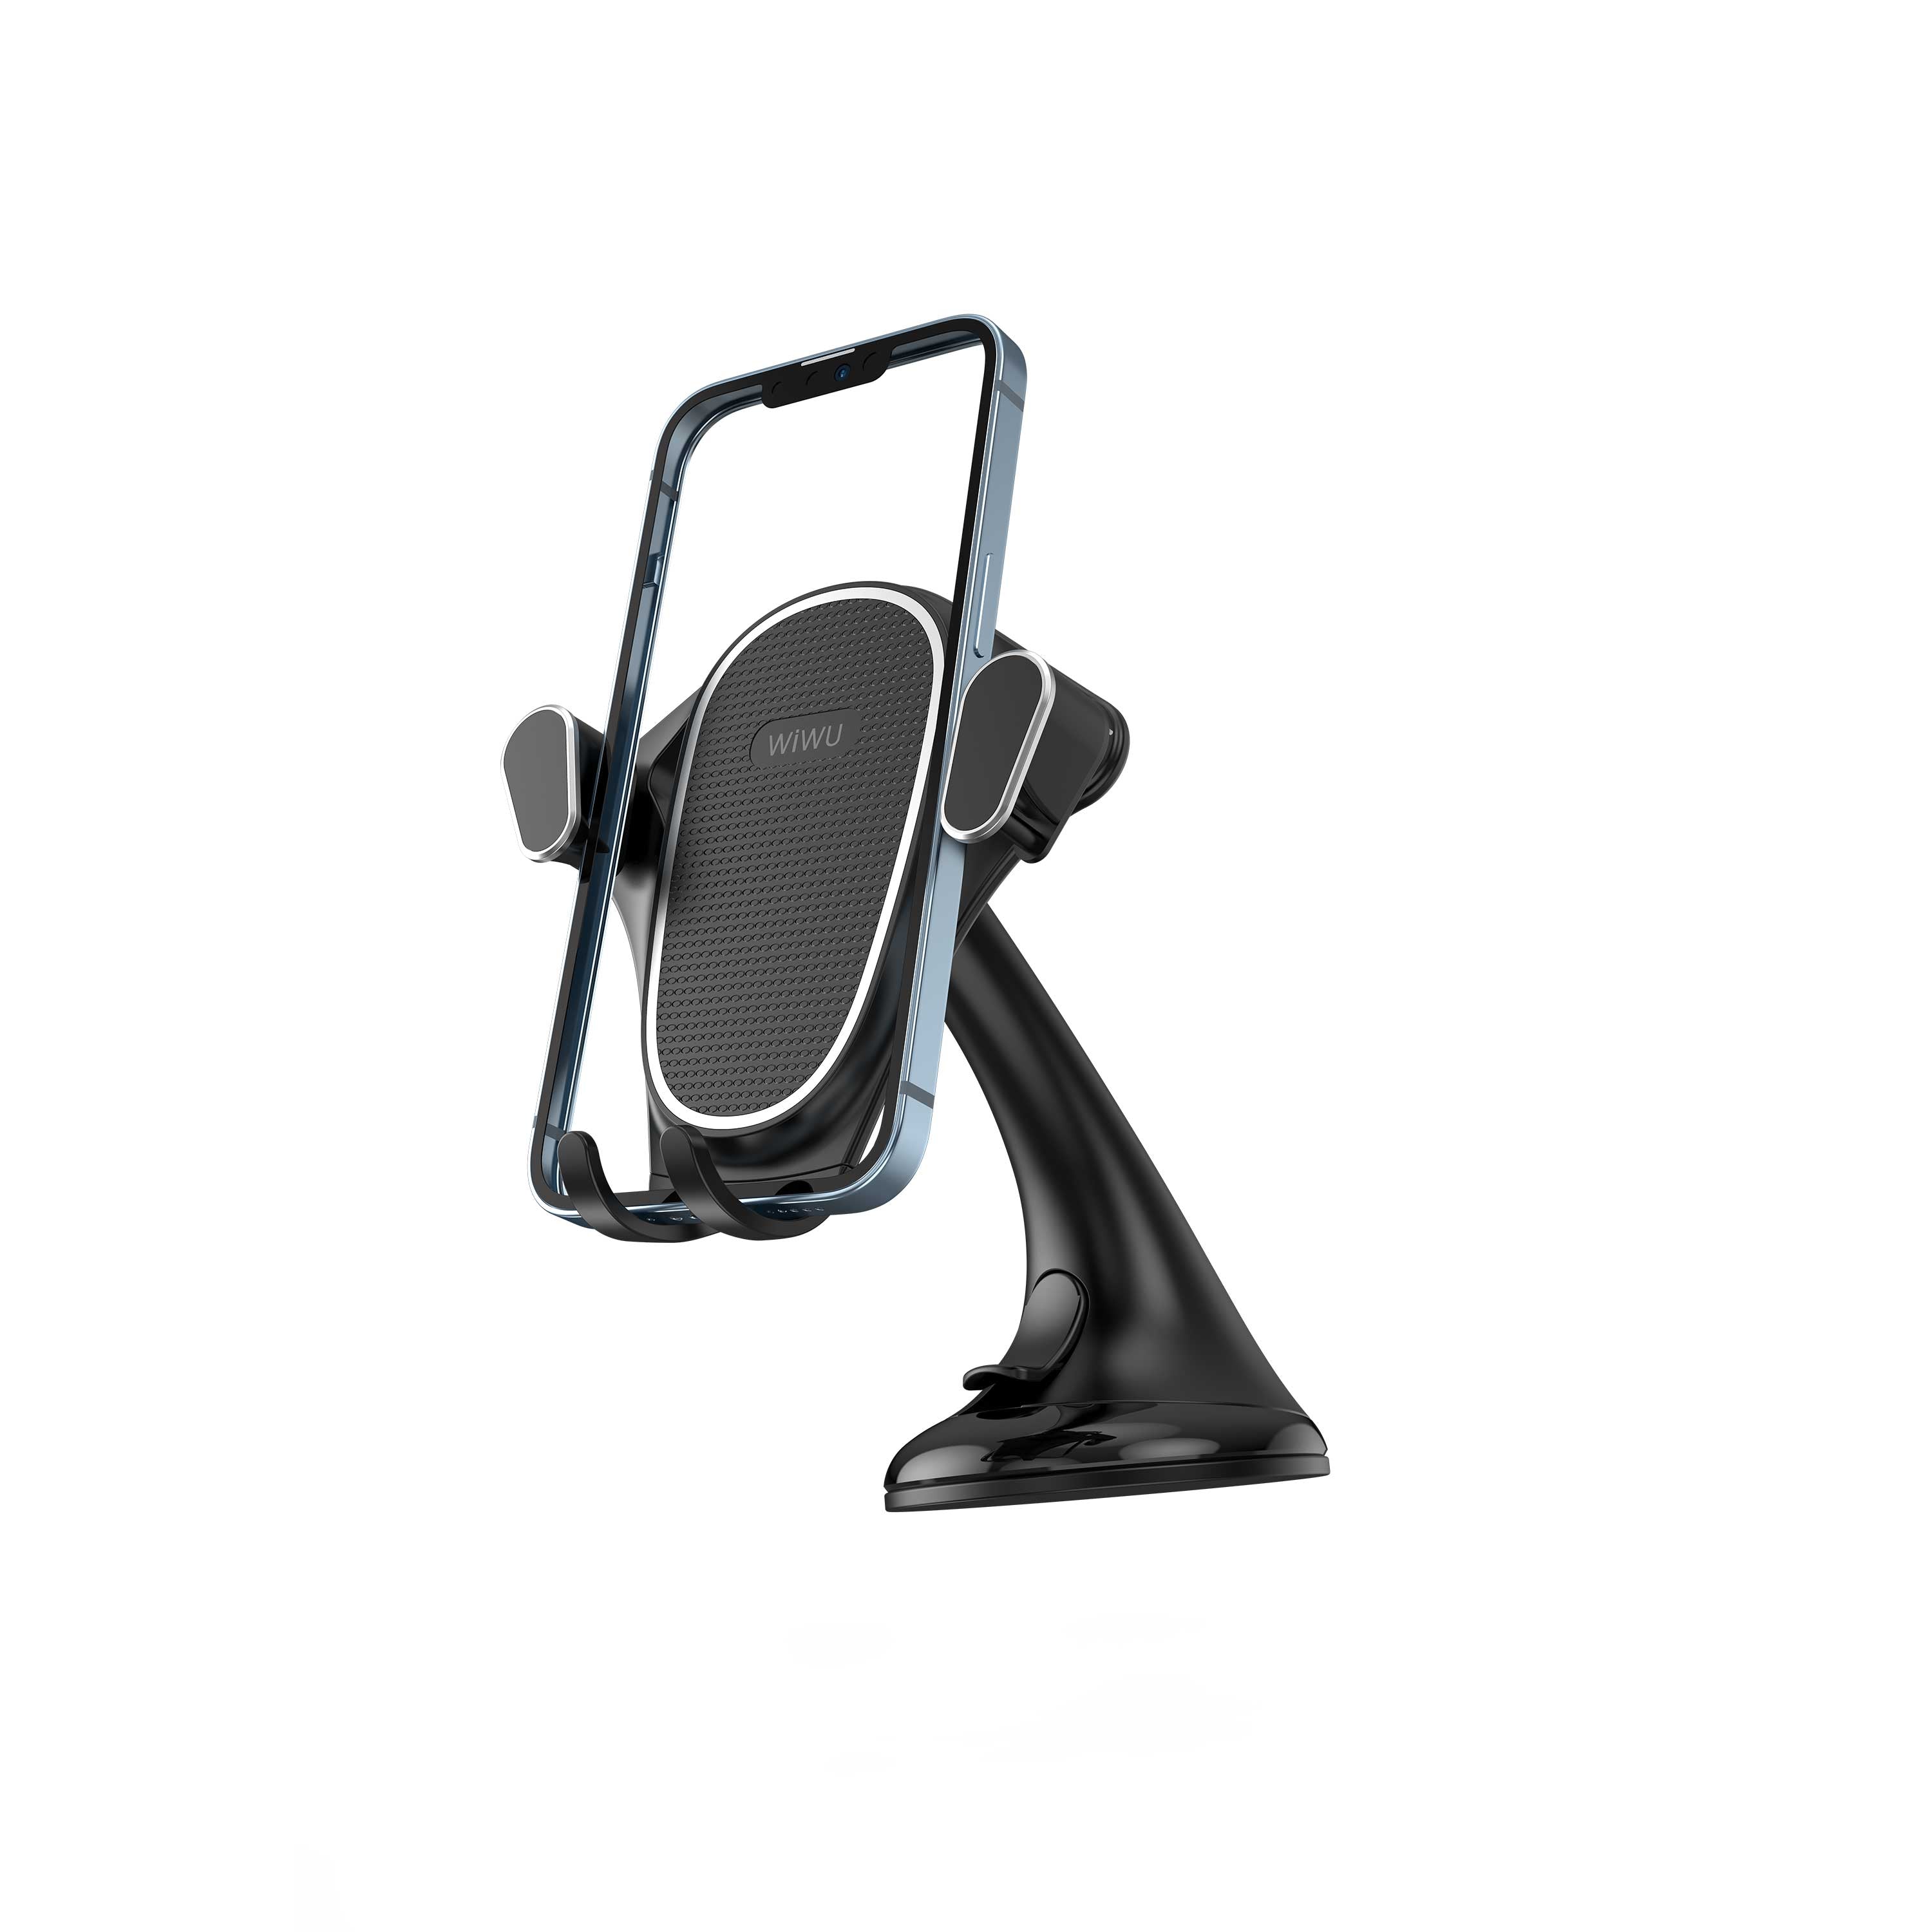 Wiwu CH019 Suction Cup Design Car Phone Holder Working With Phone Weight